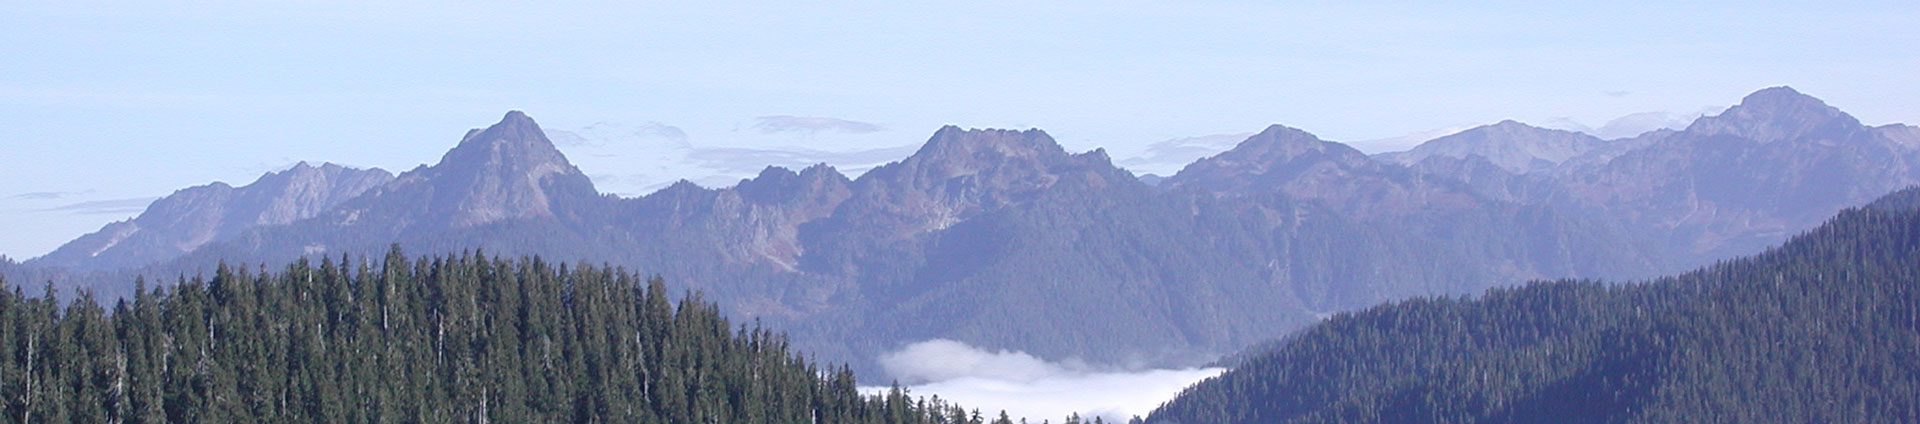 header image of olympic national park